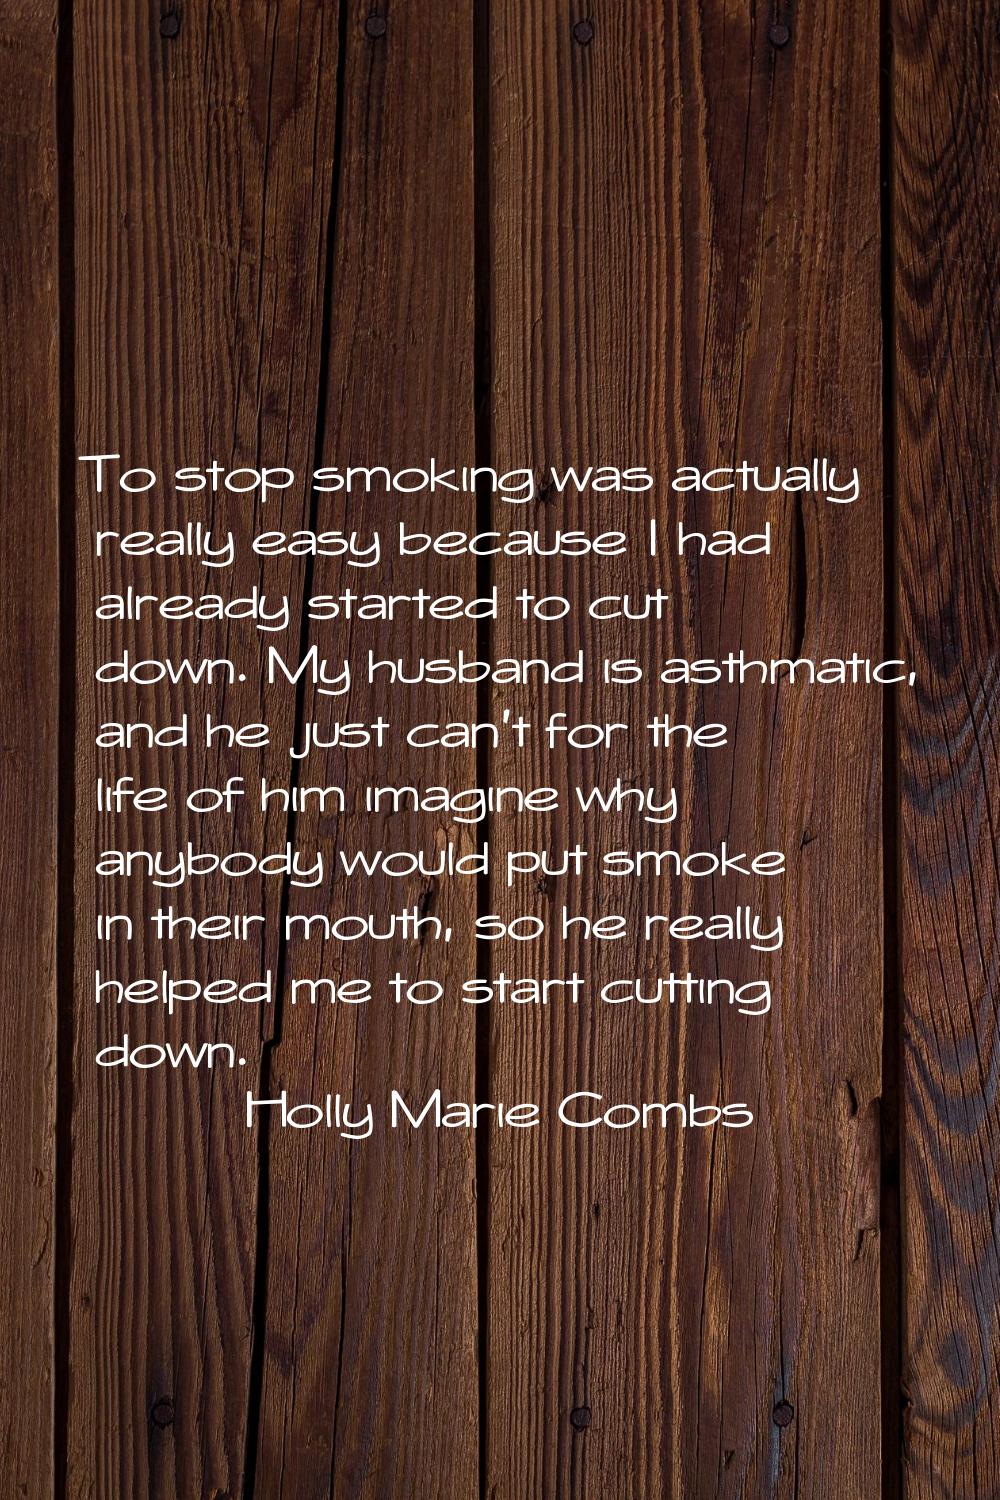 To stop smoking was actually really easy because I had already started to cut down. My husband is a